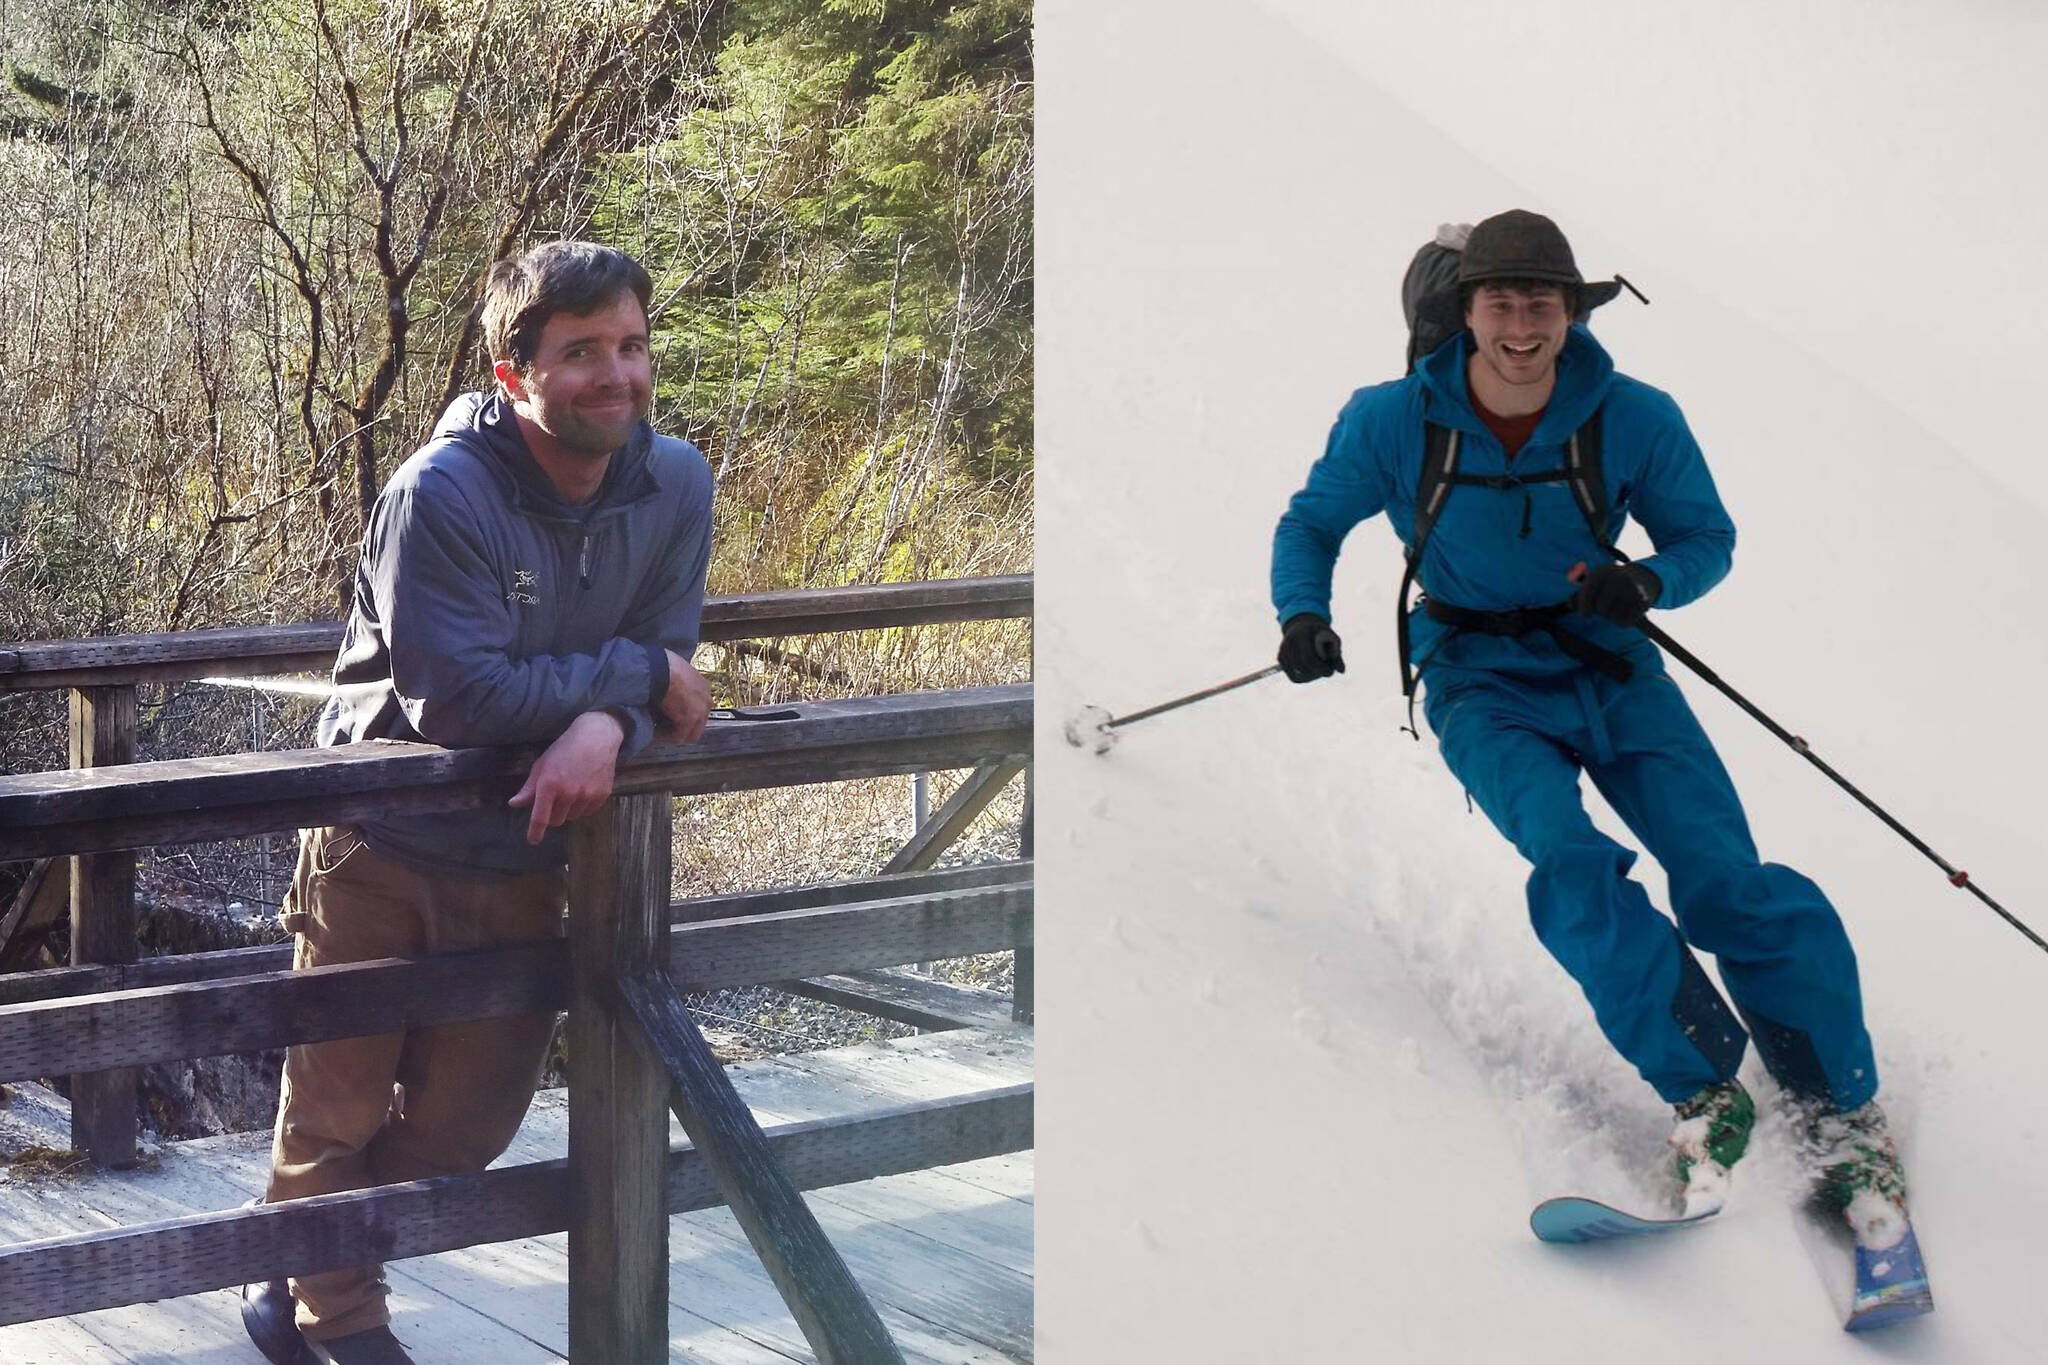 This week marks five years since climbers Ryan Johnson, left, and Marc-Andre Leclerc, right, were reported missing after summiting the north face of the Mendenhall Towers in Juneau. (Courtesy Photos / Ruth Johnson, Serge Leclerc)